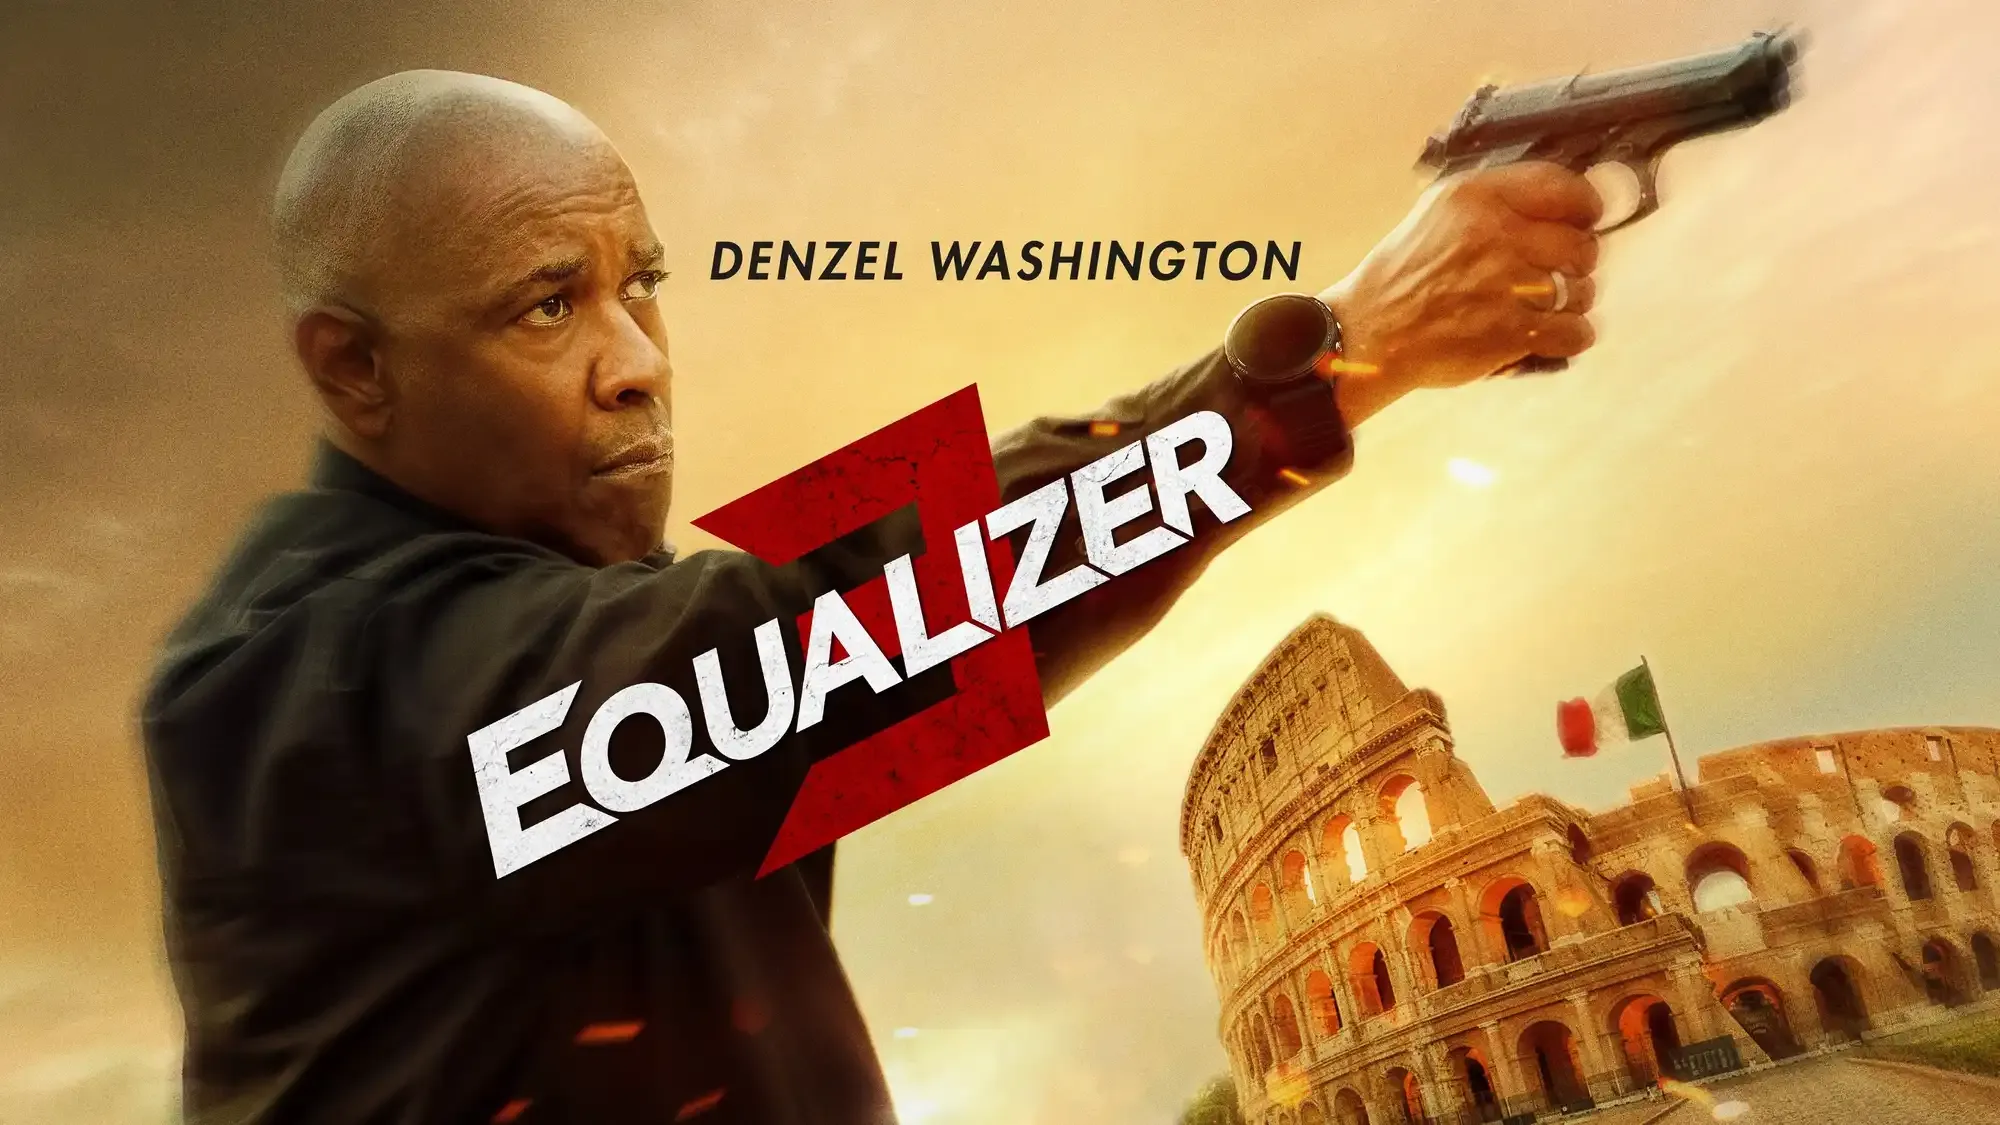 The Equalizer 3 movie review